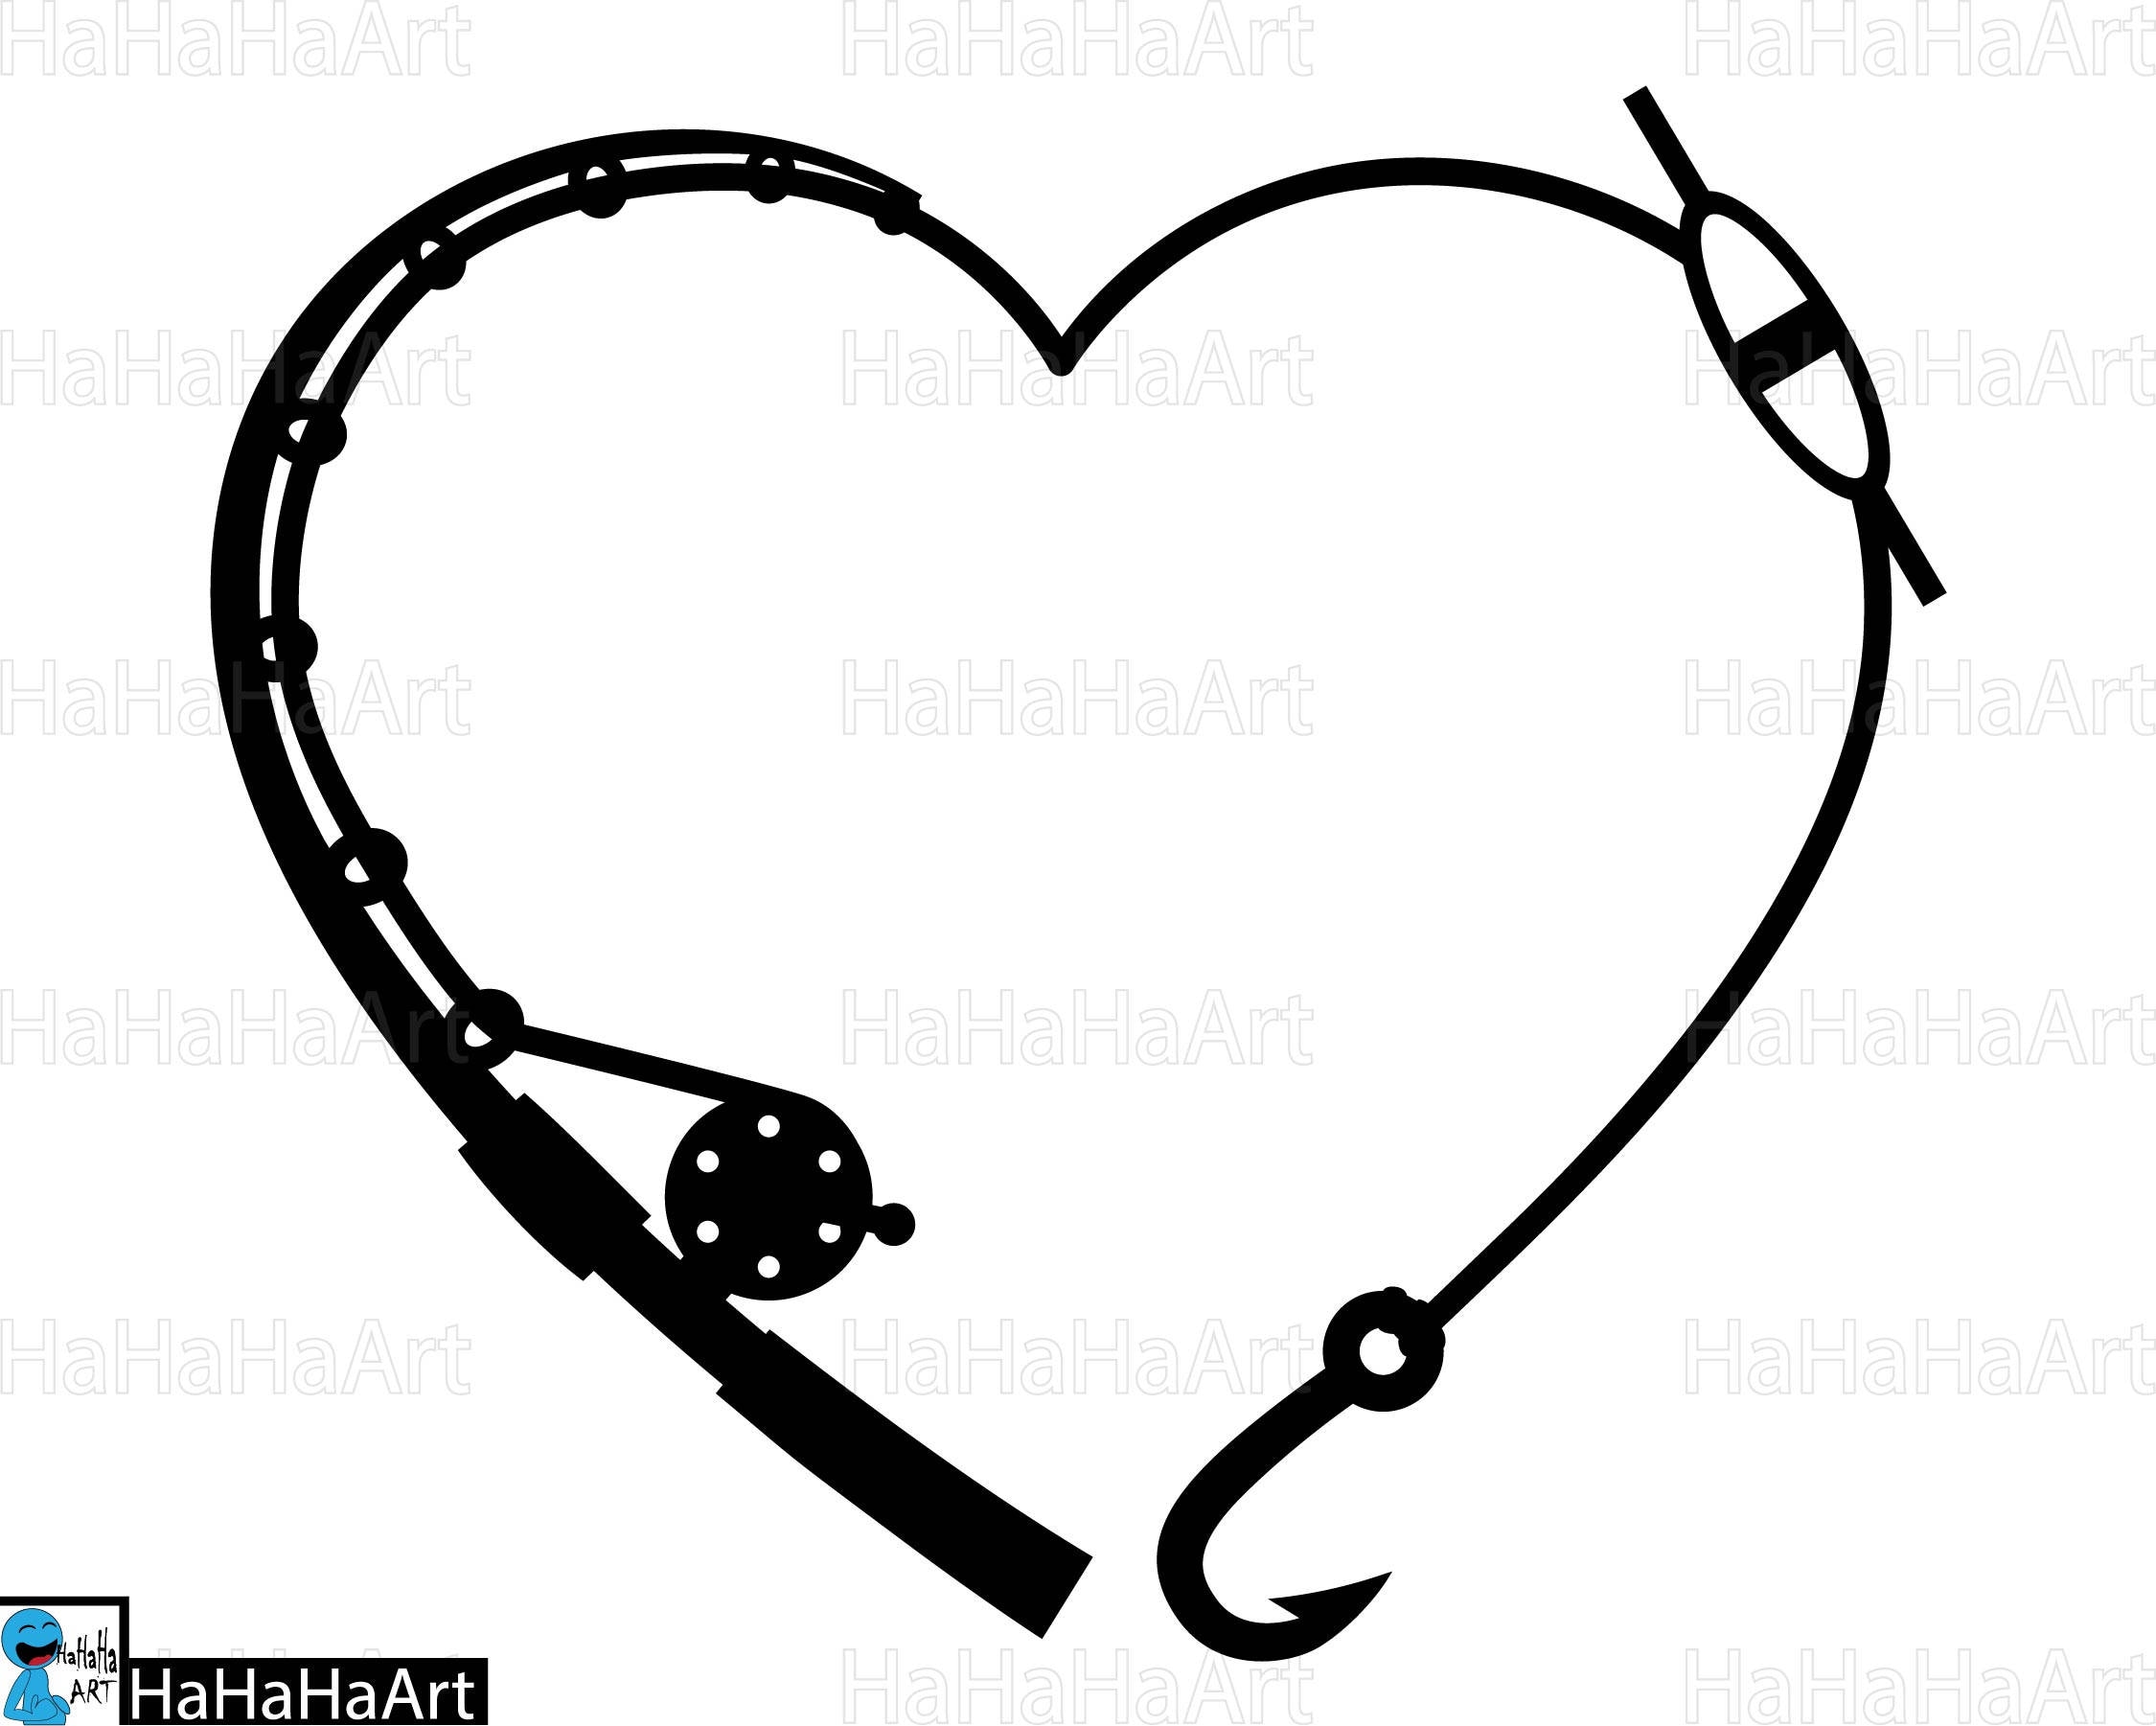 Heart fishing rod Clipart / Cutting Files svg png jpg dxf